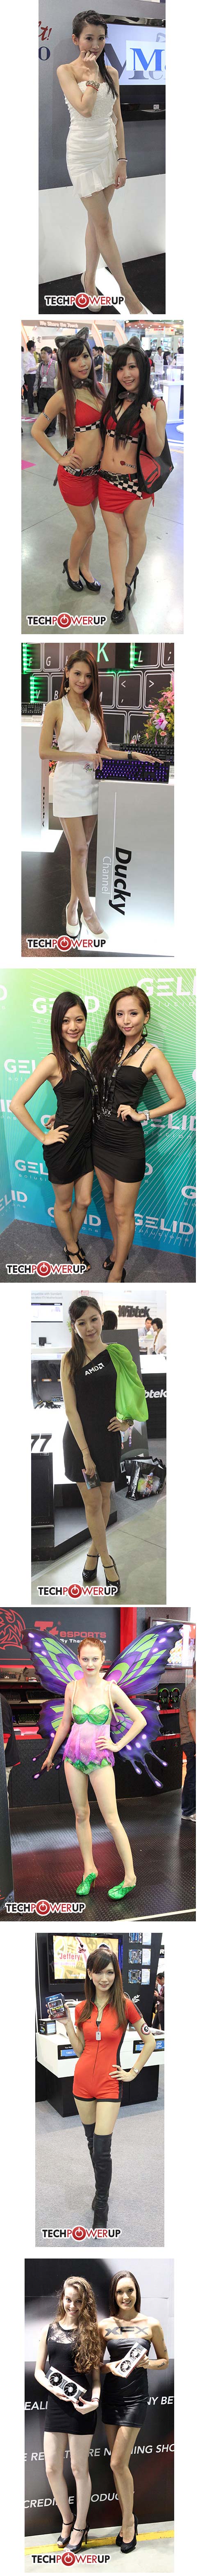 Computex 2012 Booth Babes с TechPowerUp